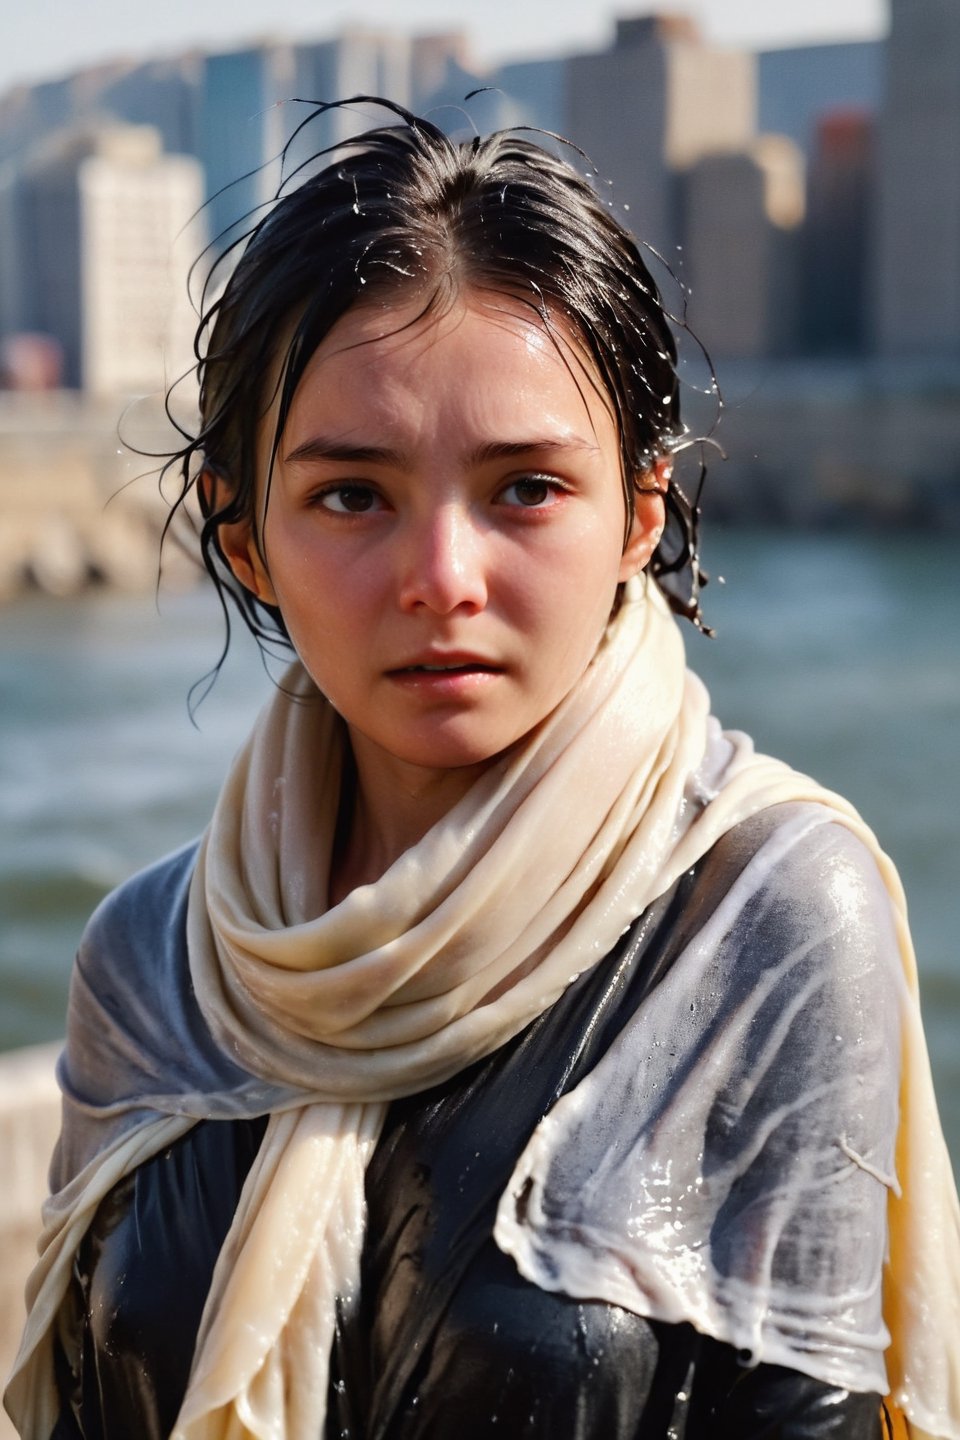 low quality photo, film grain, blur, A wet woman wrapped in a cream-colored wet scarf, with a wet black coat draped over her wet shoulders. Her gaze is pensive, her wet black hair tousled by the wind, wet bare face, against an urban backdrop, sunlit face,girlvn,wet korean girl,more detail XL,soakingwetclothes